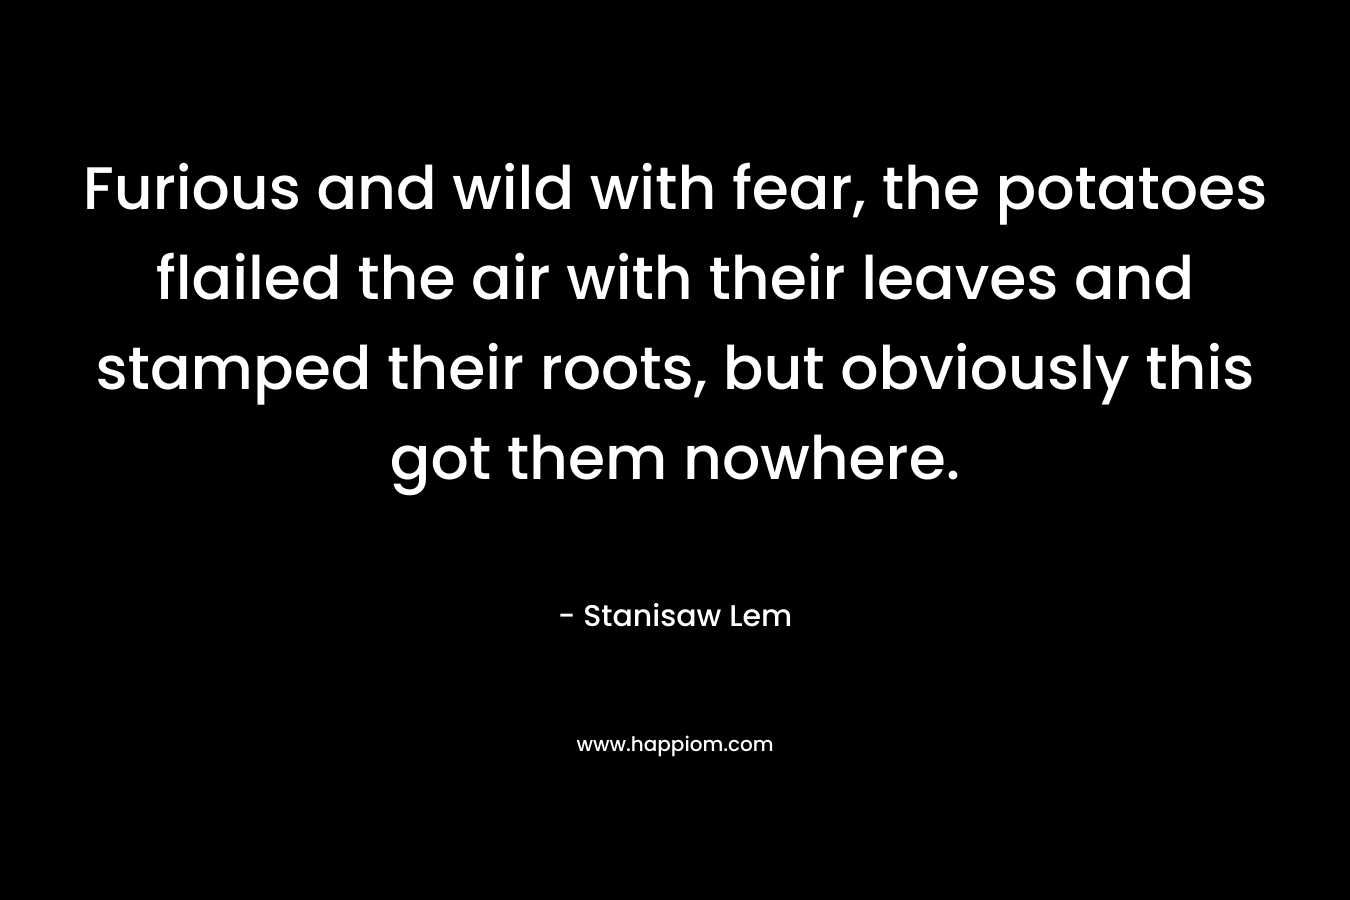 Furious and wild with fear, the potatoes flailed the air with their leaves and stamped their roots, but obviously this got them nowhere. – Stanisaw Lem